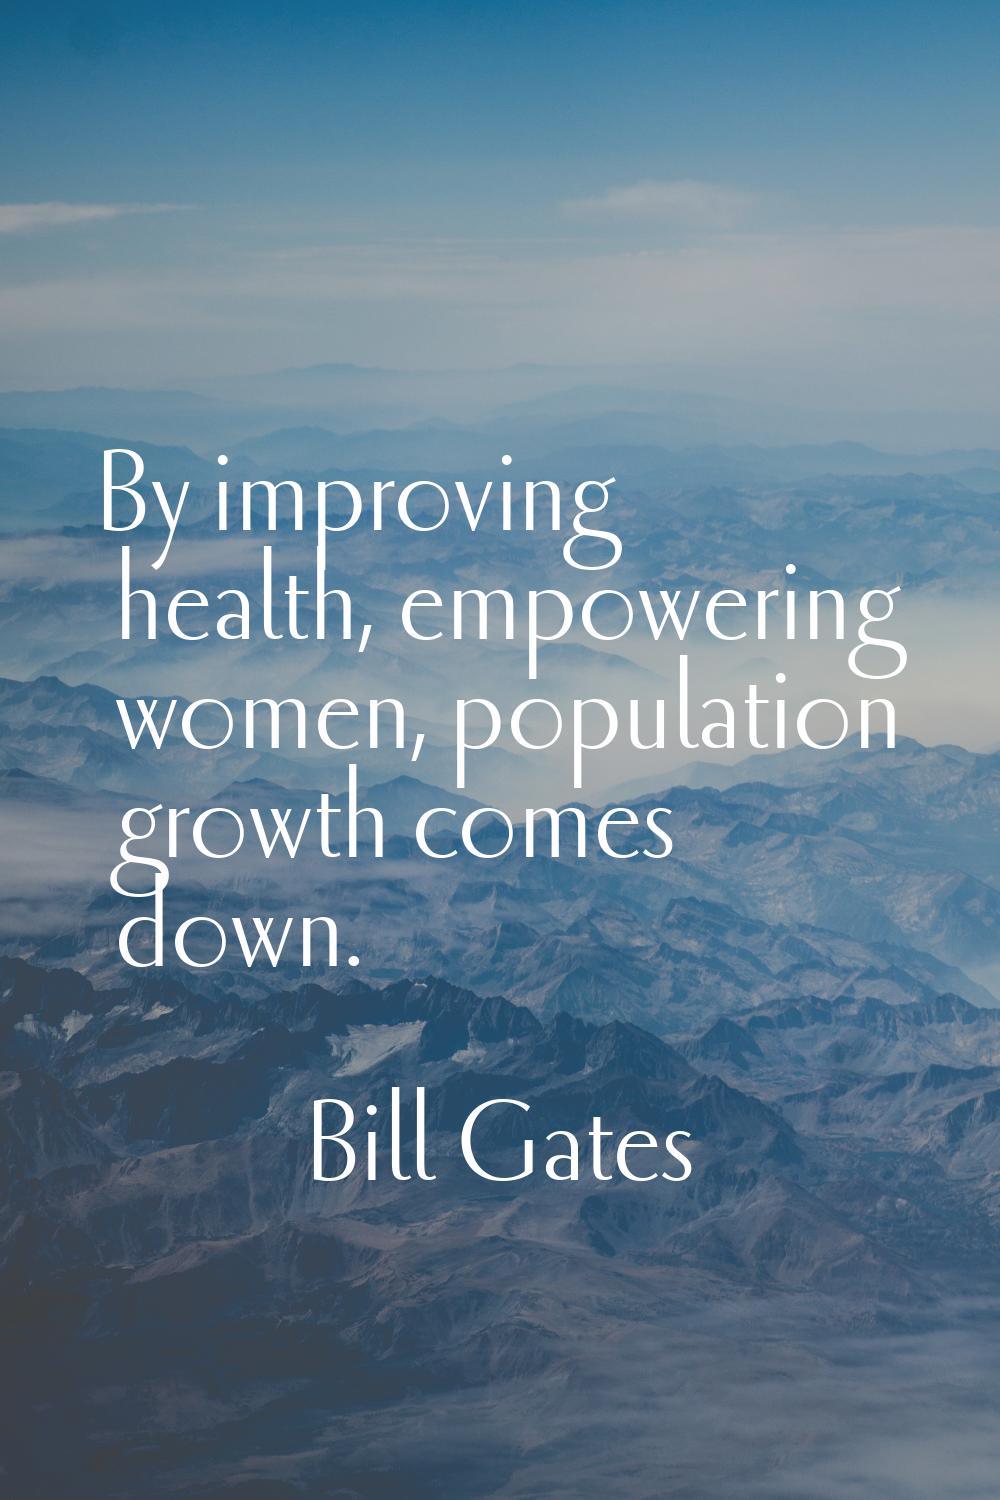 By improving health, empowering women, population growth comes down.